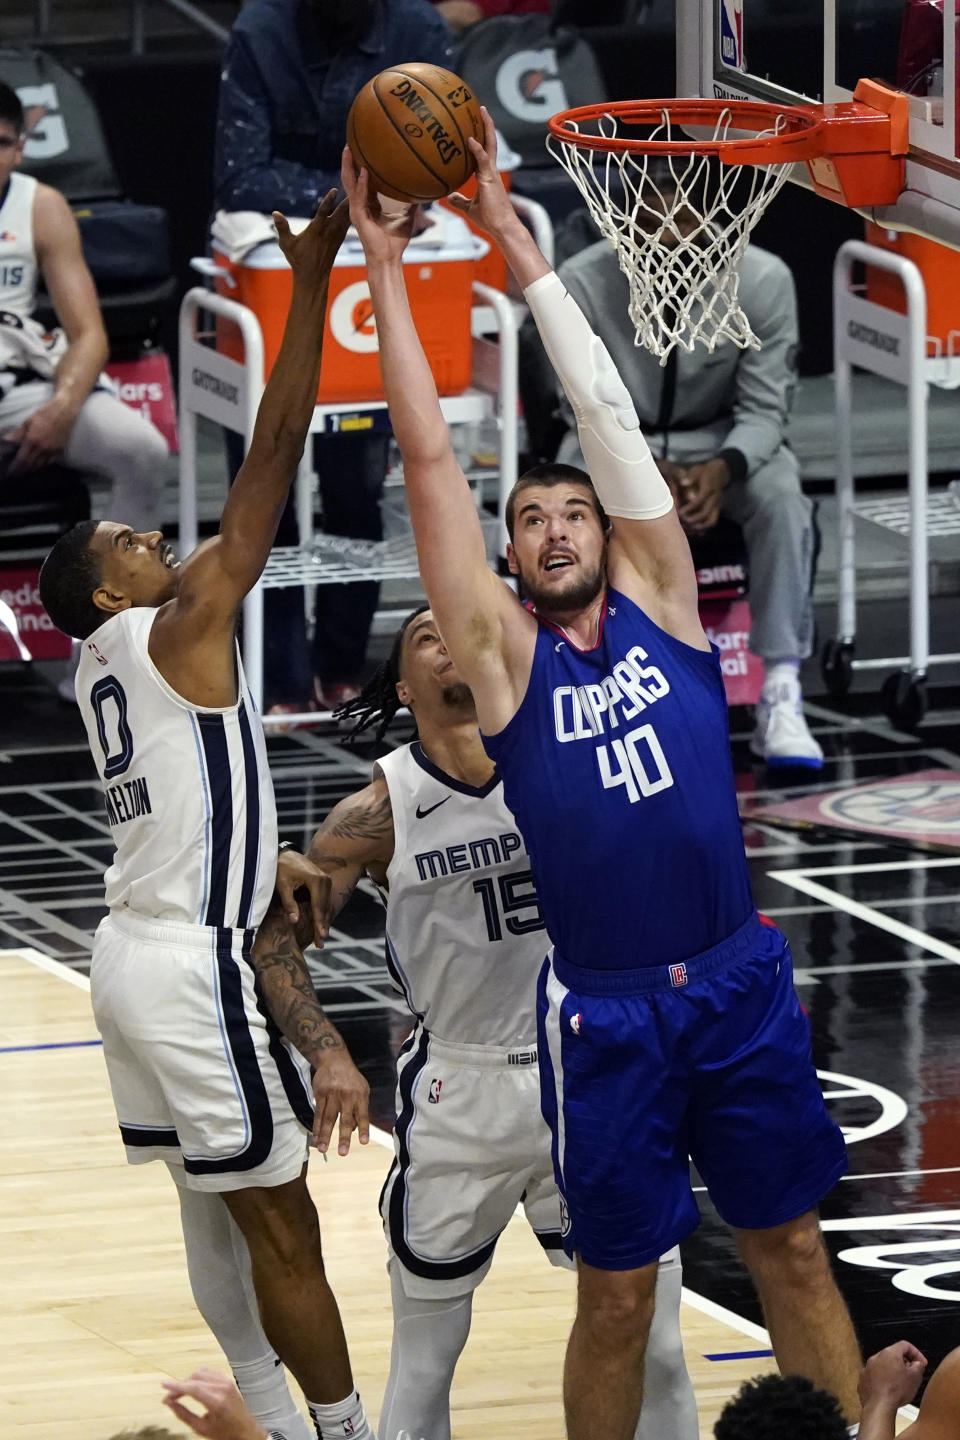 Los Angeles Clippers center Ivica Zubac (40) grabs a rebound over Memphis Grizzlies guard De'Anthony Melton (0) during the first half of an NBA basketball game Wednesday, April 21, 2021, in Los Angeles. (AP Photo/Marcio Jose Sanchez)